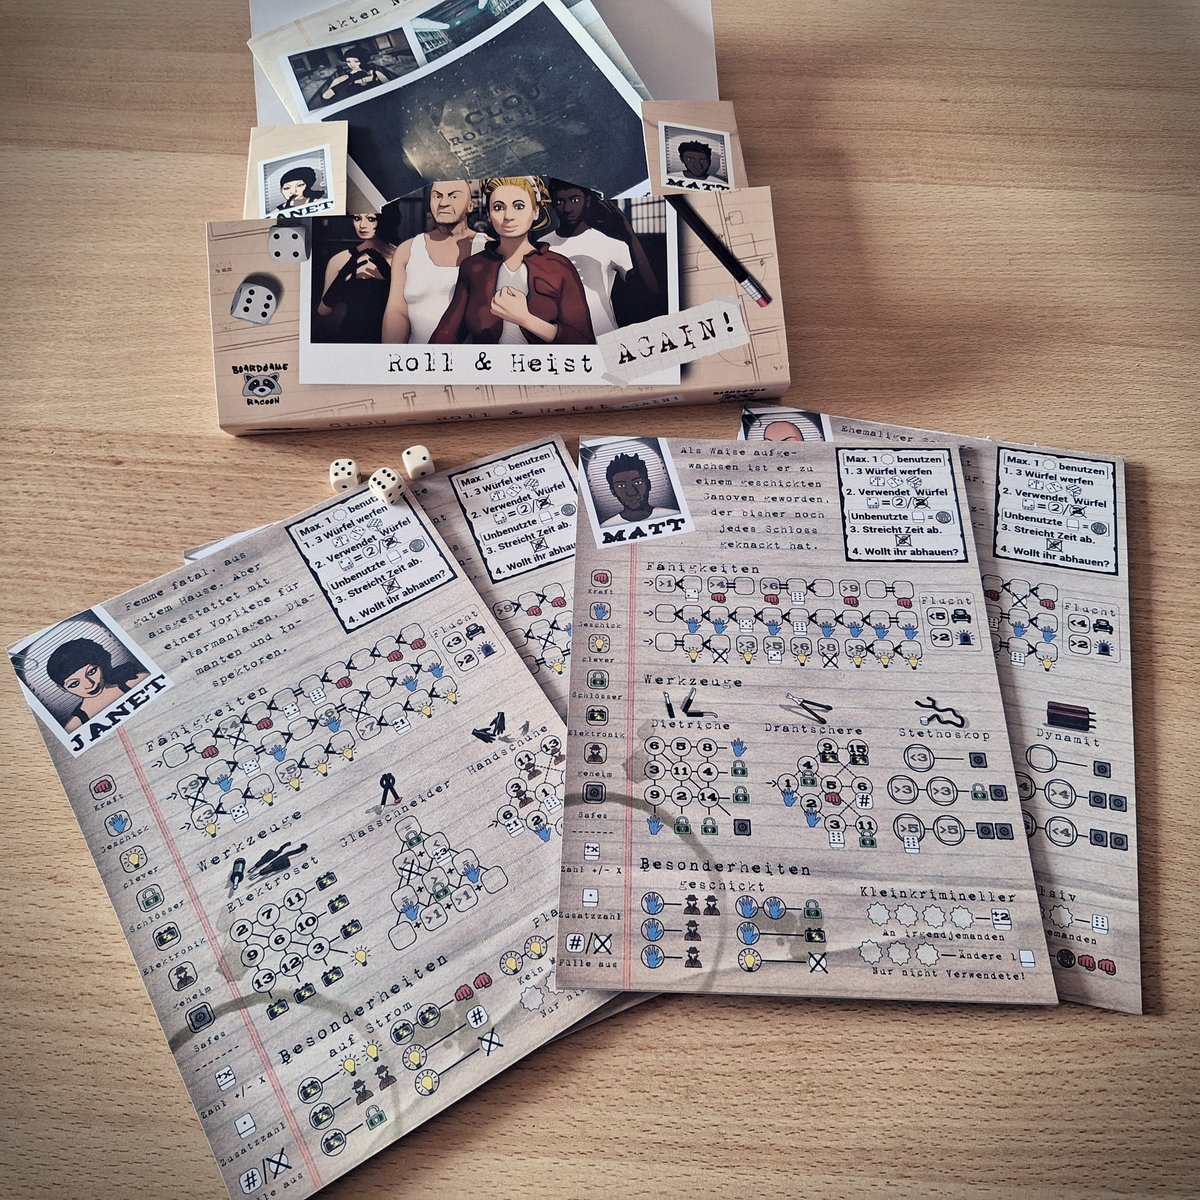 A small preview of the printed pads of the improved thieves....ähhh hero sheets in Clou - Roll & Heist AGAIN.. A #coop #rollandwrite #boardgame